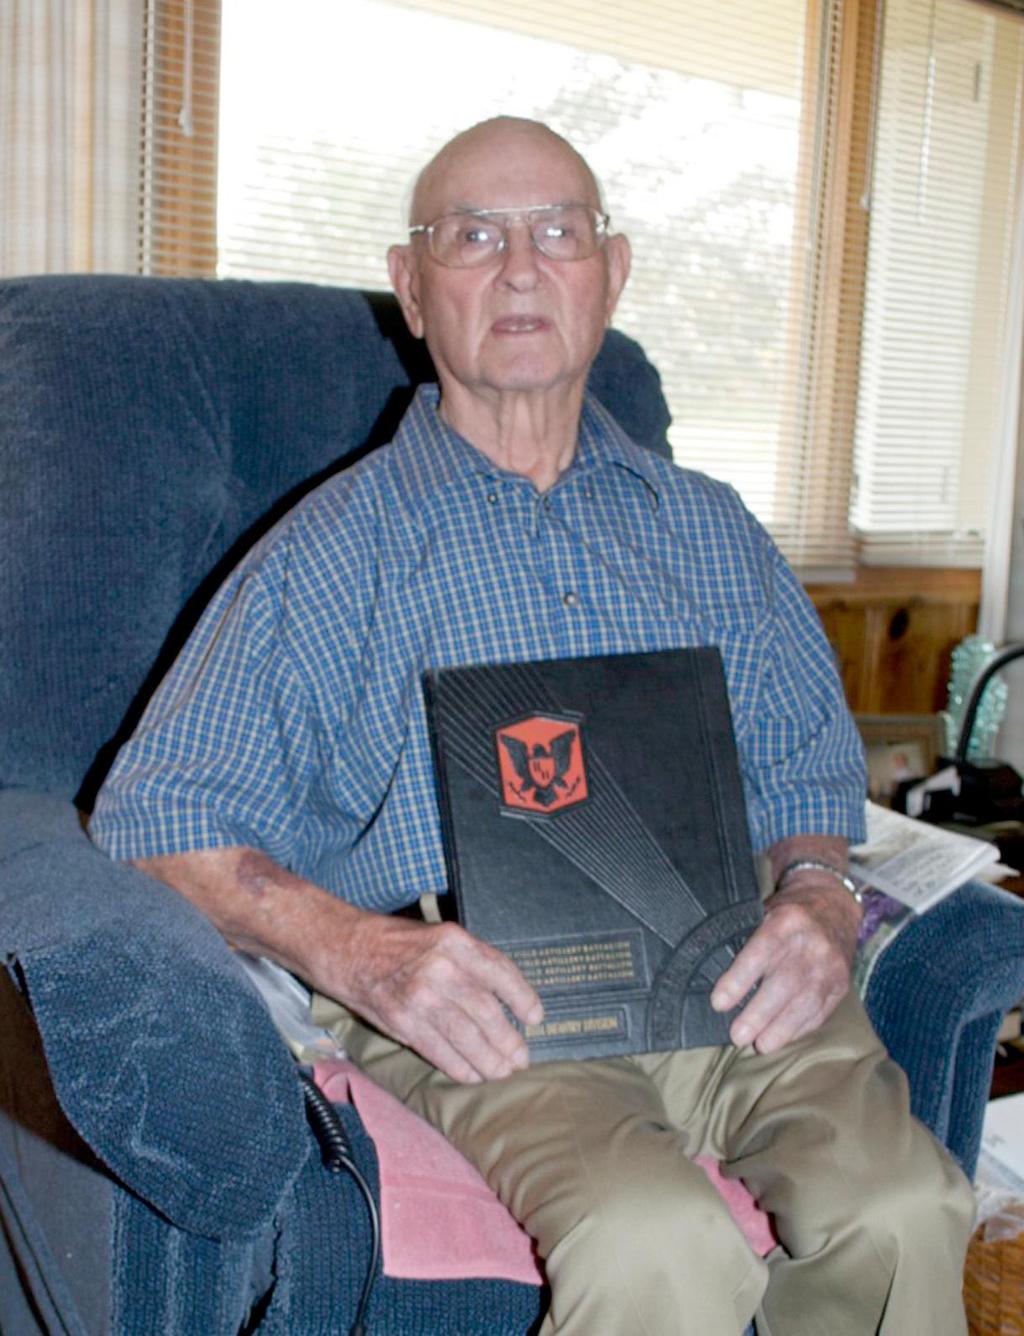 From Meade County News Leo Bachman saw duty in Europe and the Pacific as WWII came to a close By Tom Kuhns Leo Bachman served as a